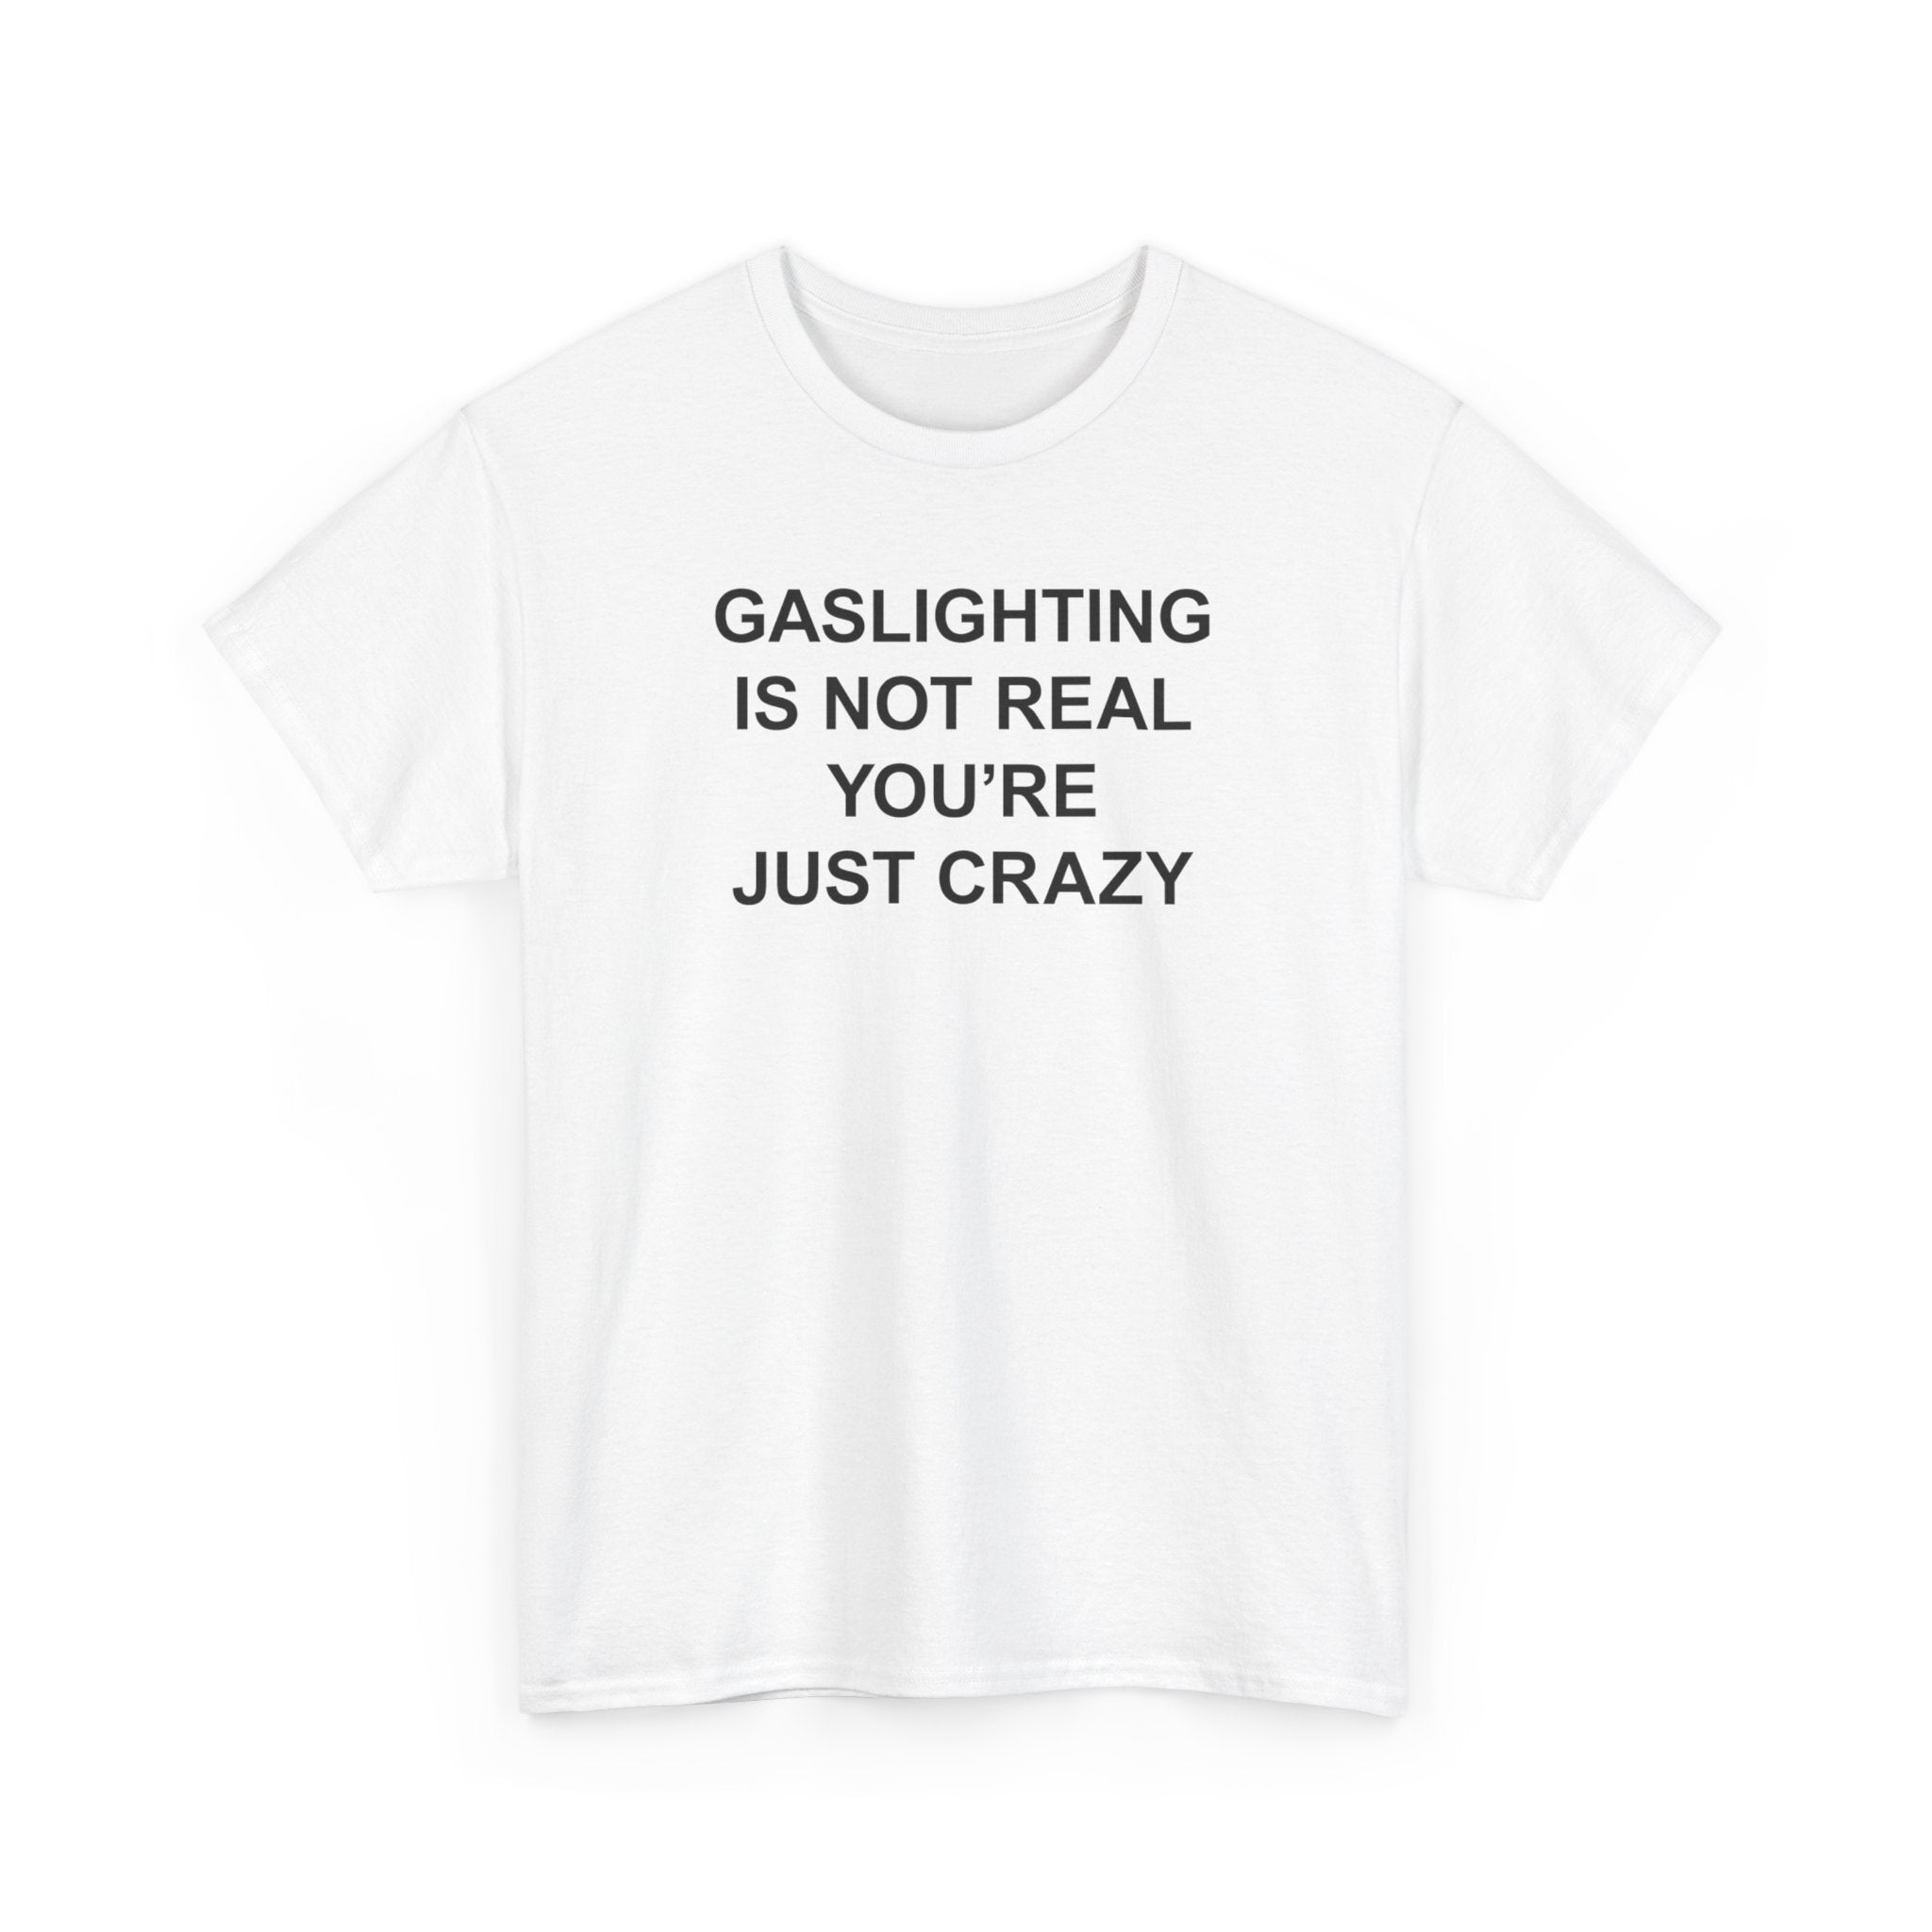 GASLIGHTING IS NOT REAL YOU'RE JUST CRAZY T-SHIRT